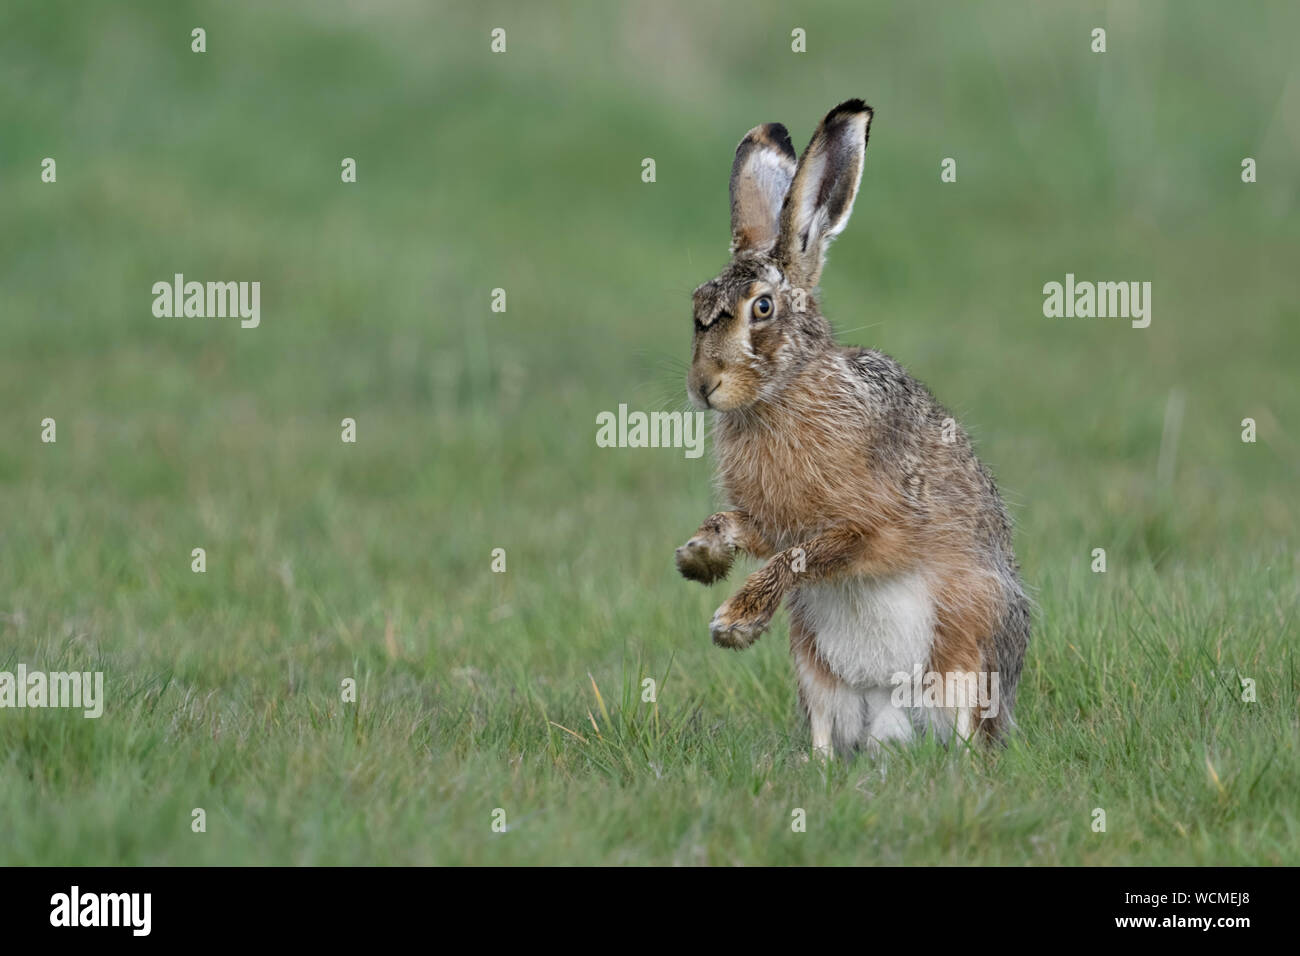 Brown Hare / European Hare ( Lepus europaeus ) sitting on hind legs, shadow boxing with front paws, wildlife, Europe. Stock Photo